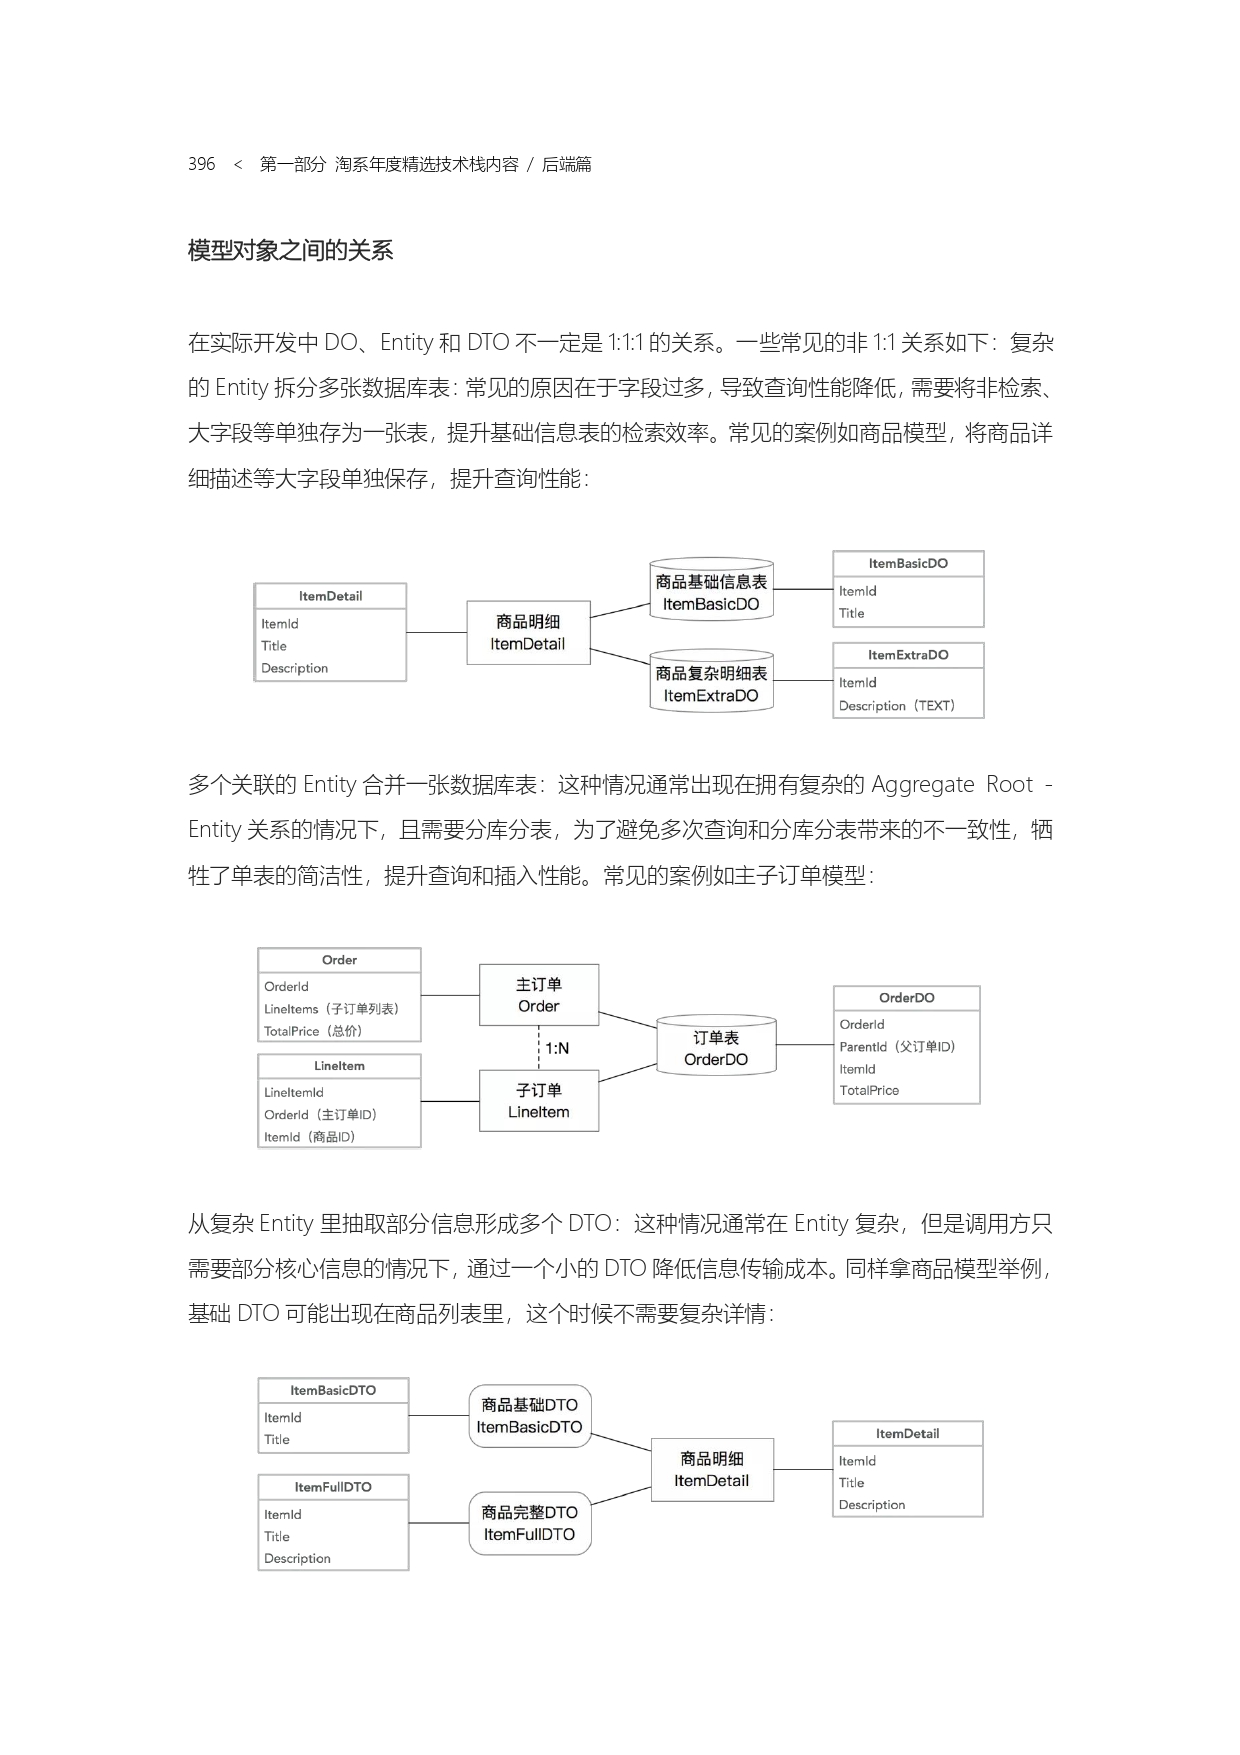 The Complete Works of Tao Technology 2020-1-570_page-0396.jpg